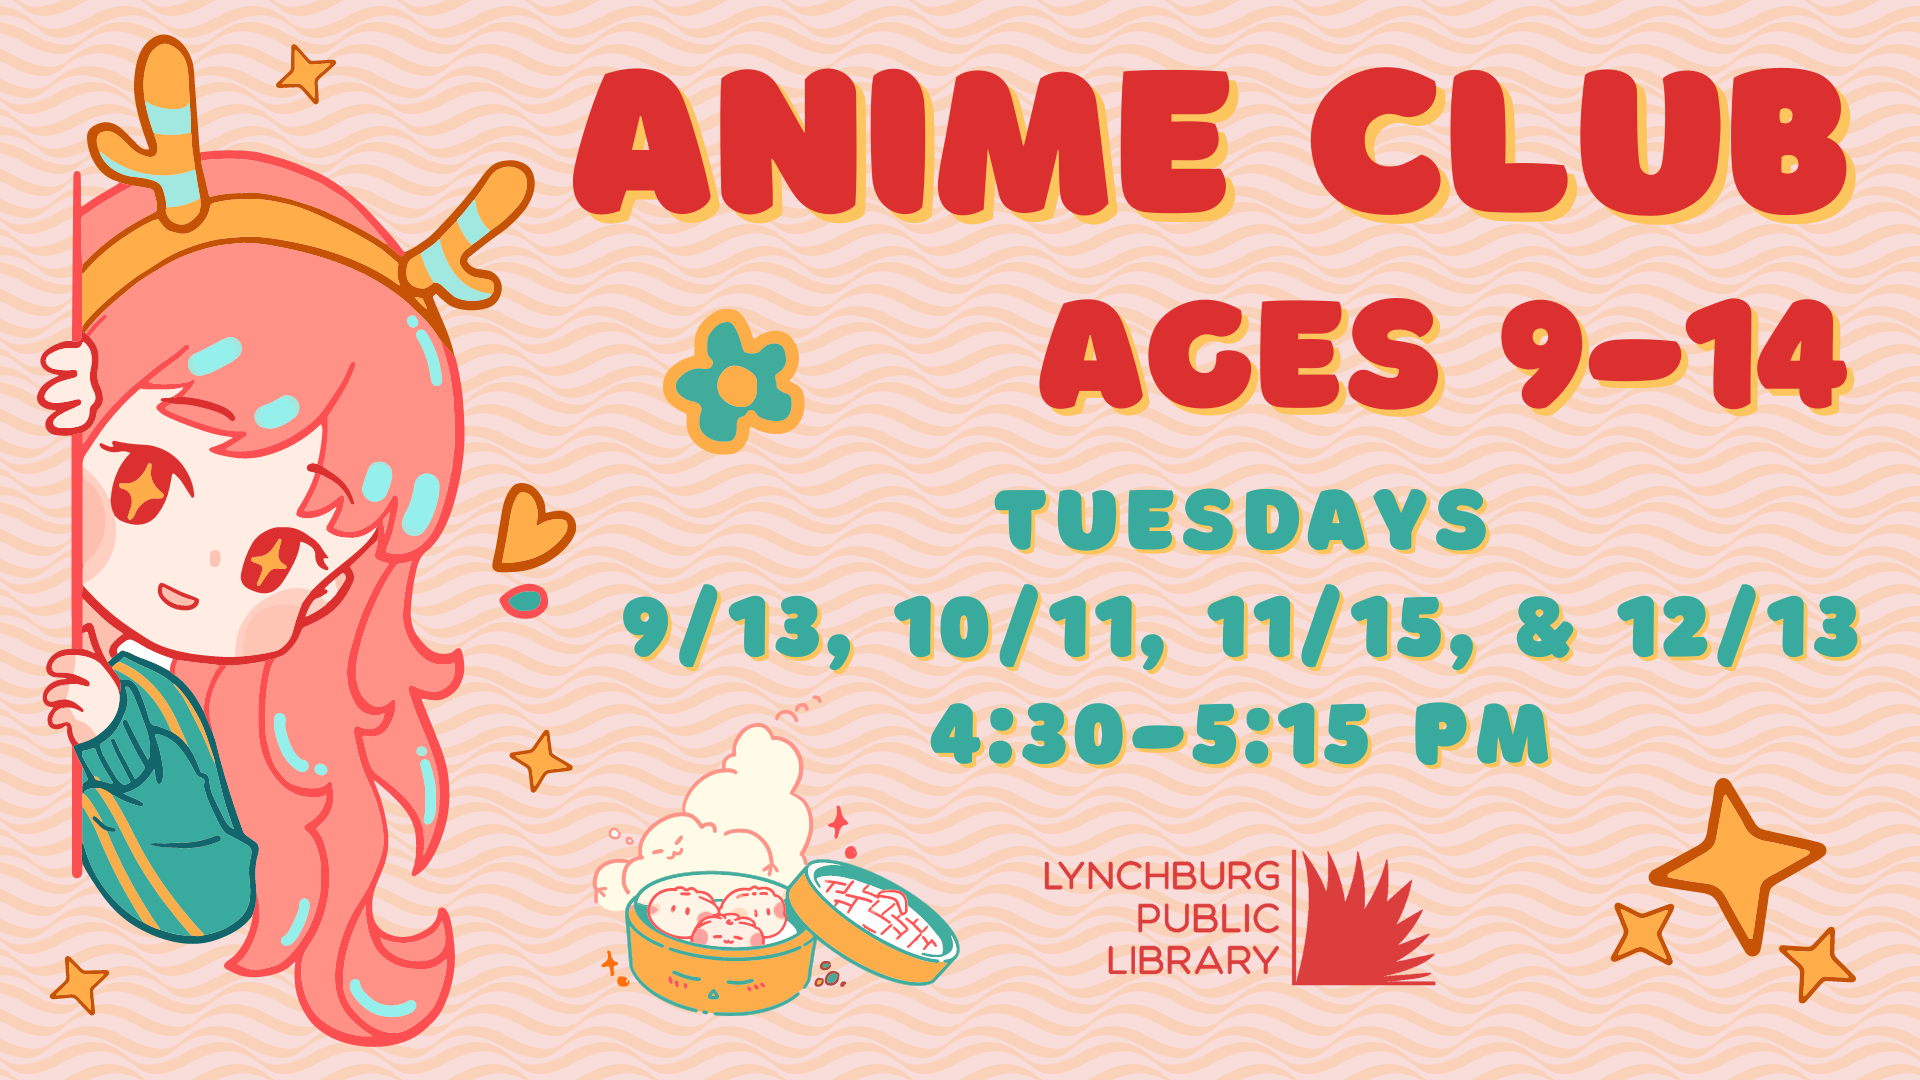 Image of an anime-style girl alongside information about LPL's Anime Club program for ages 9-14  for fall 2022